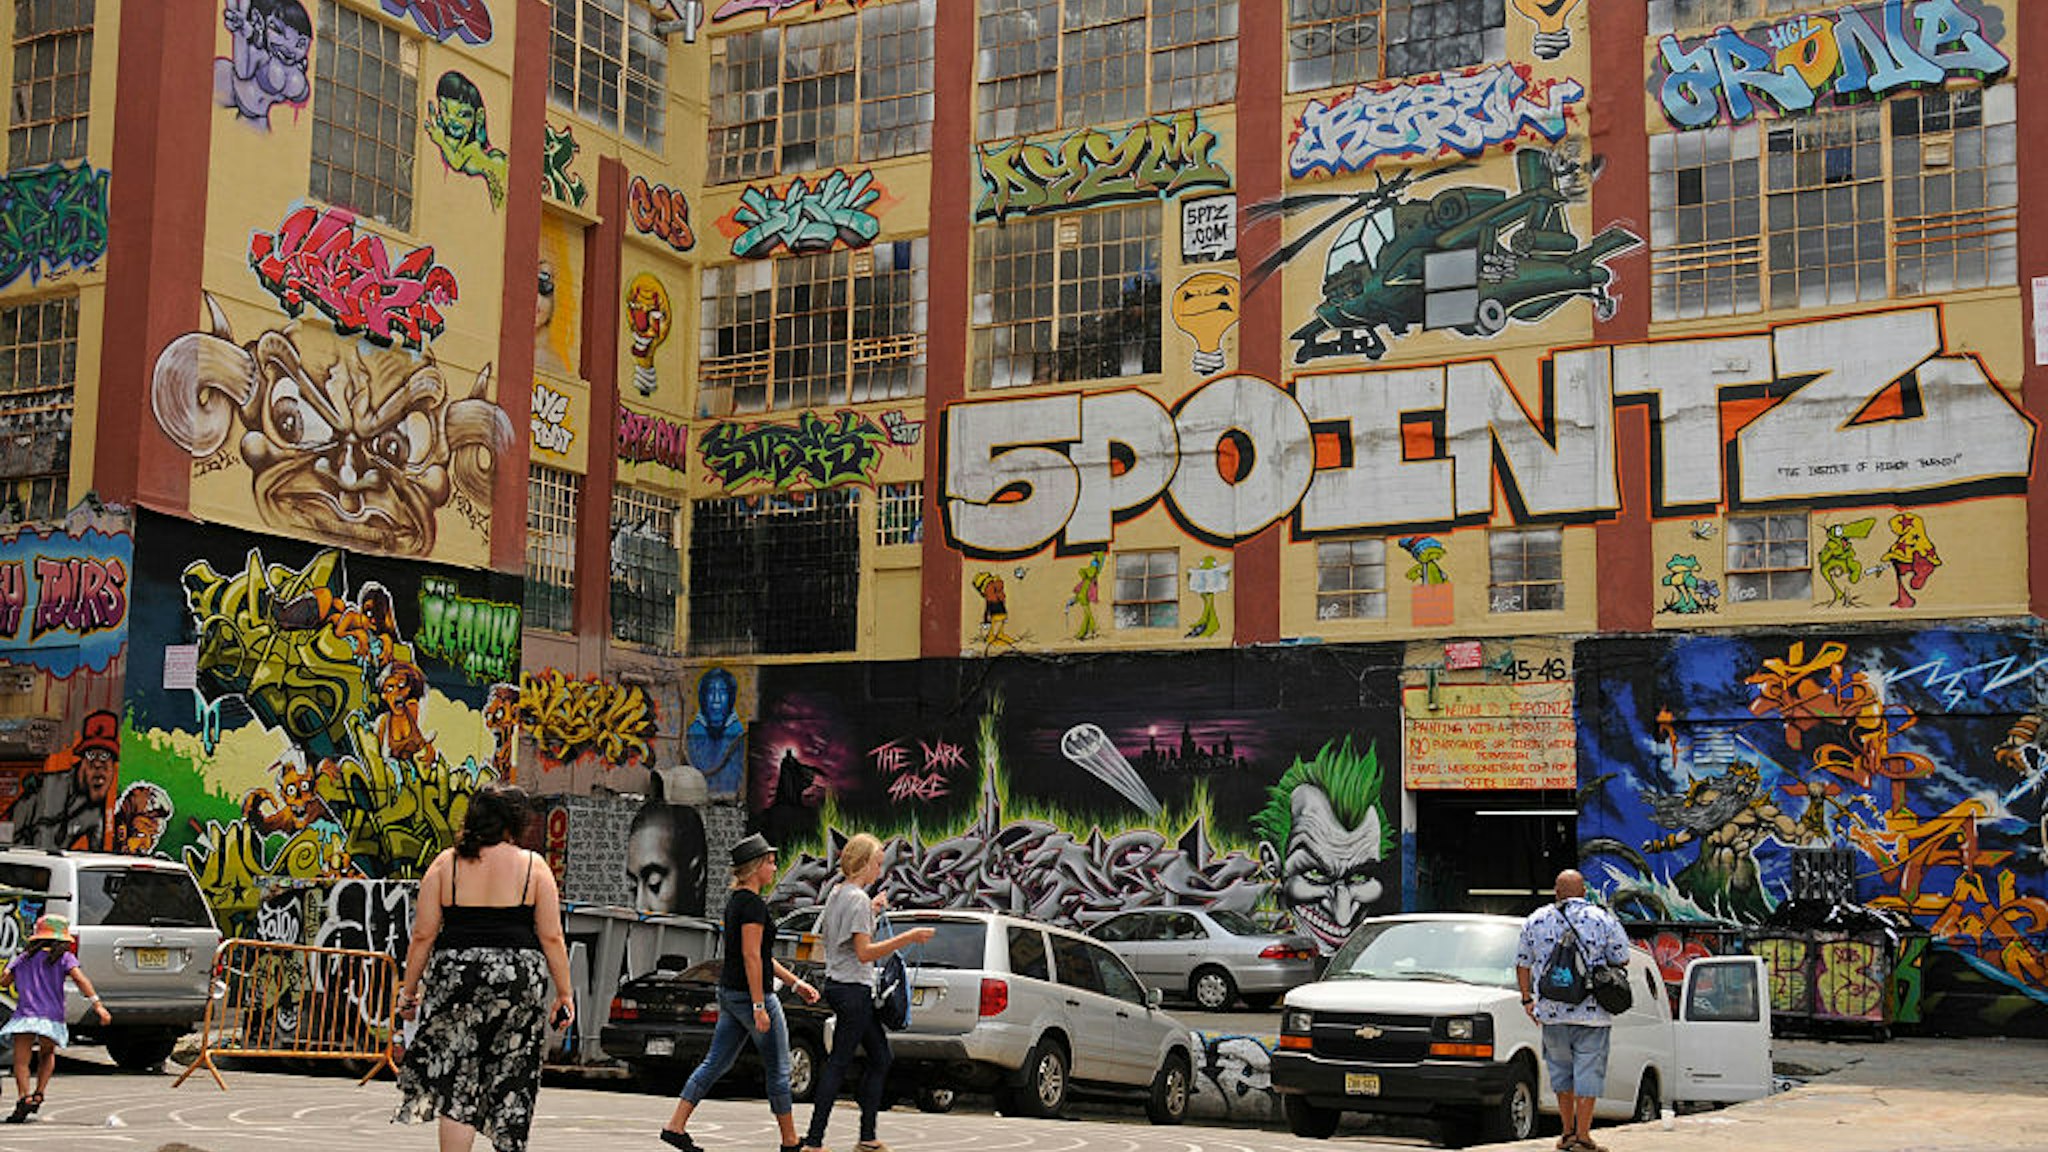 Factory building with graffitis, '5Pointz' is an outdoor art exhibit space for graffiti artists